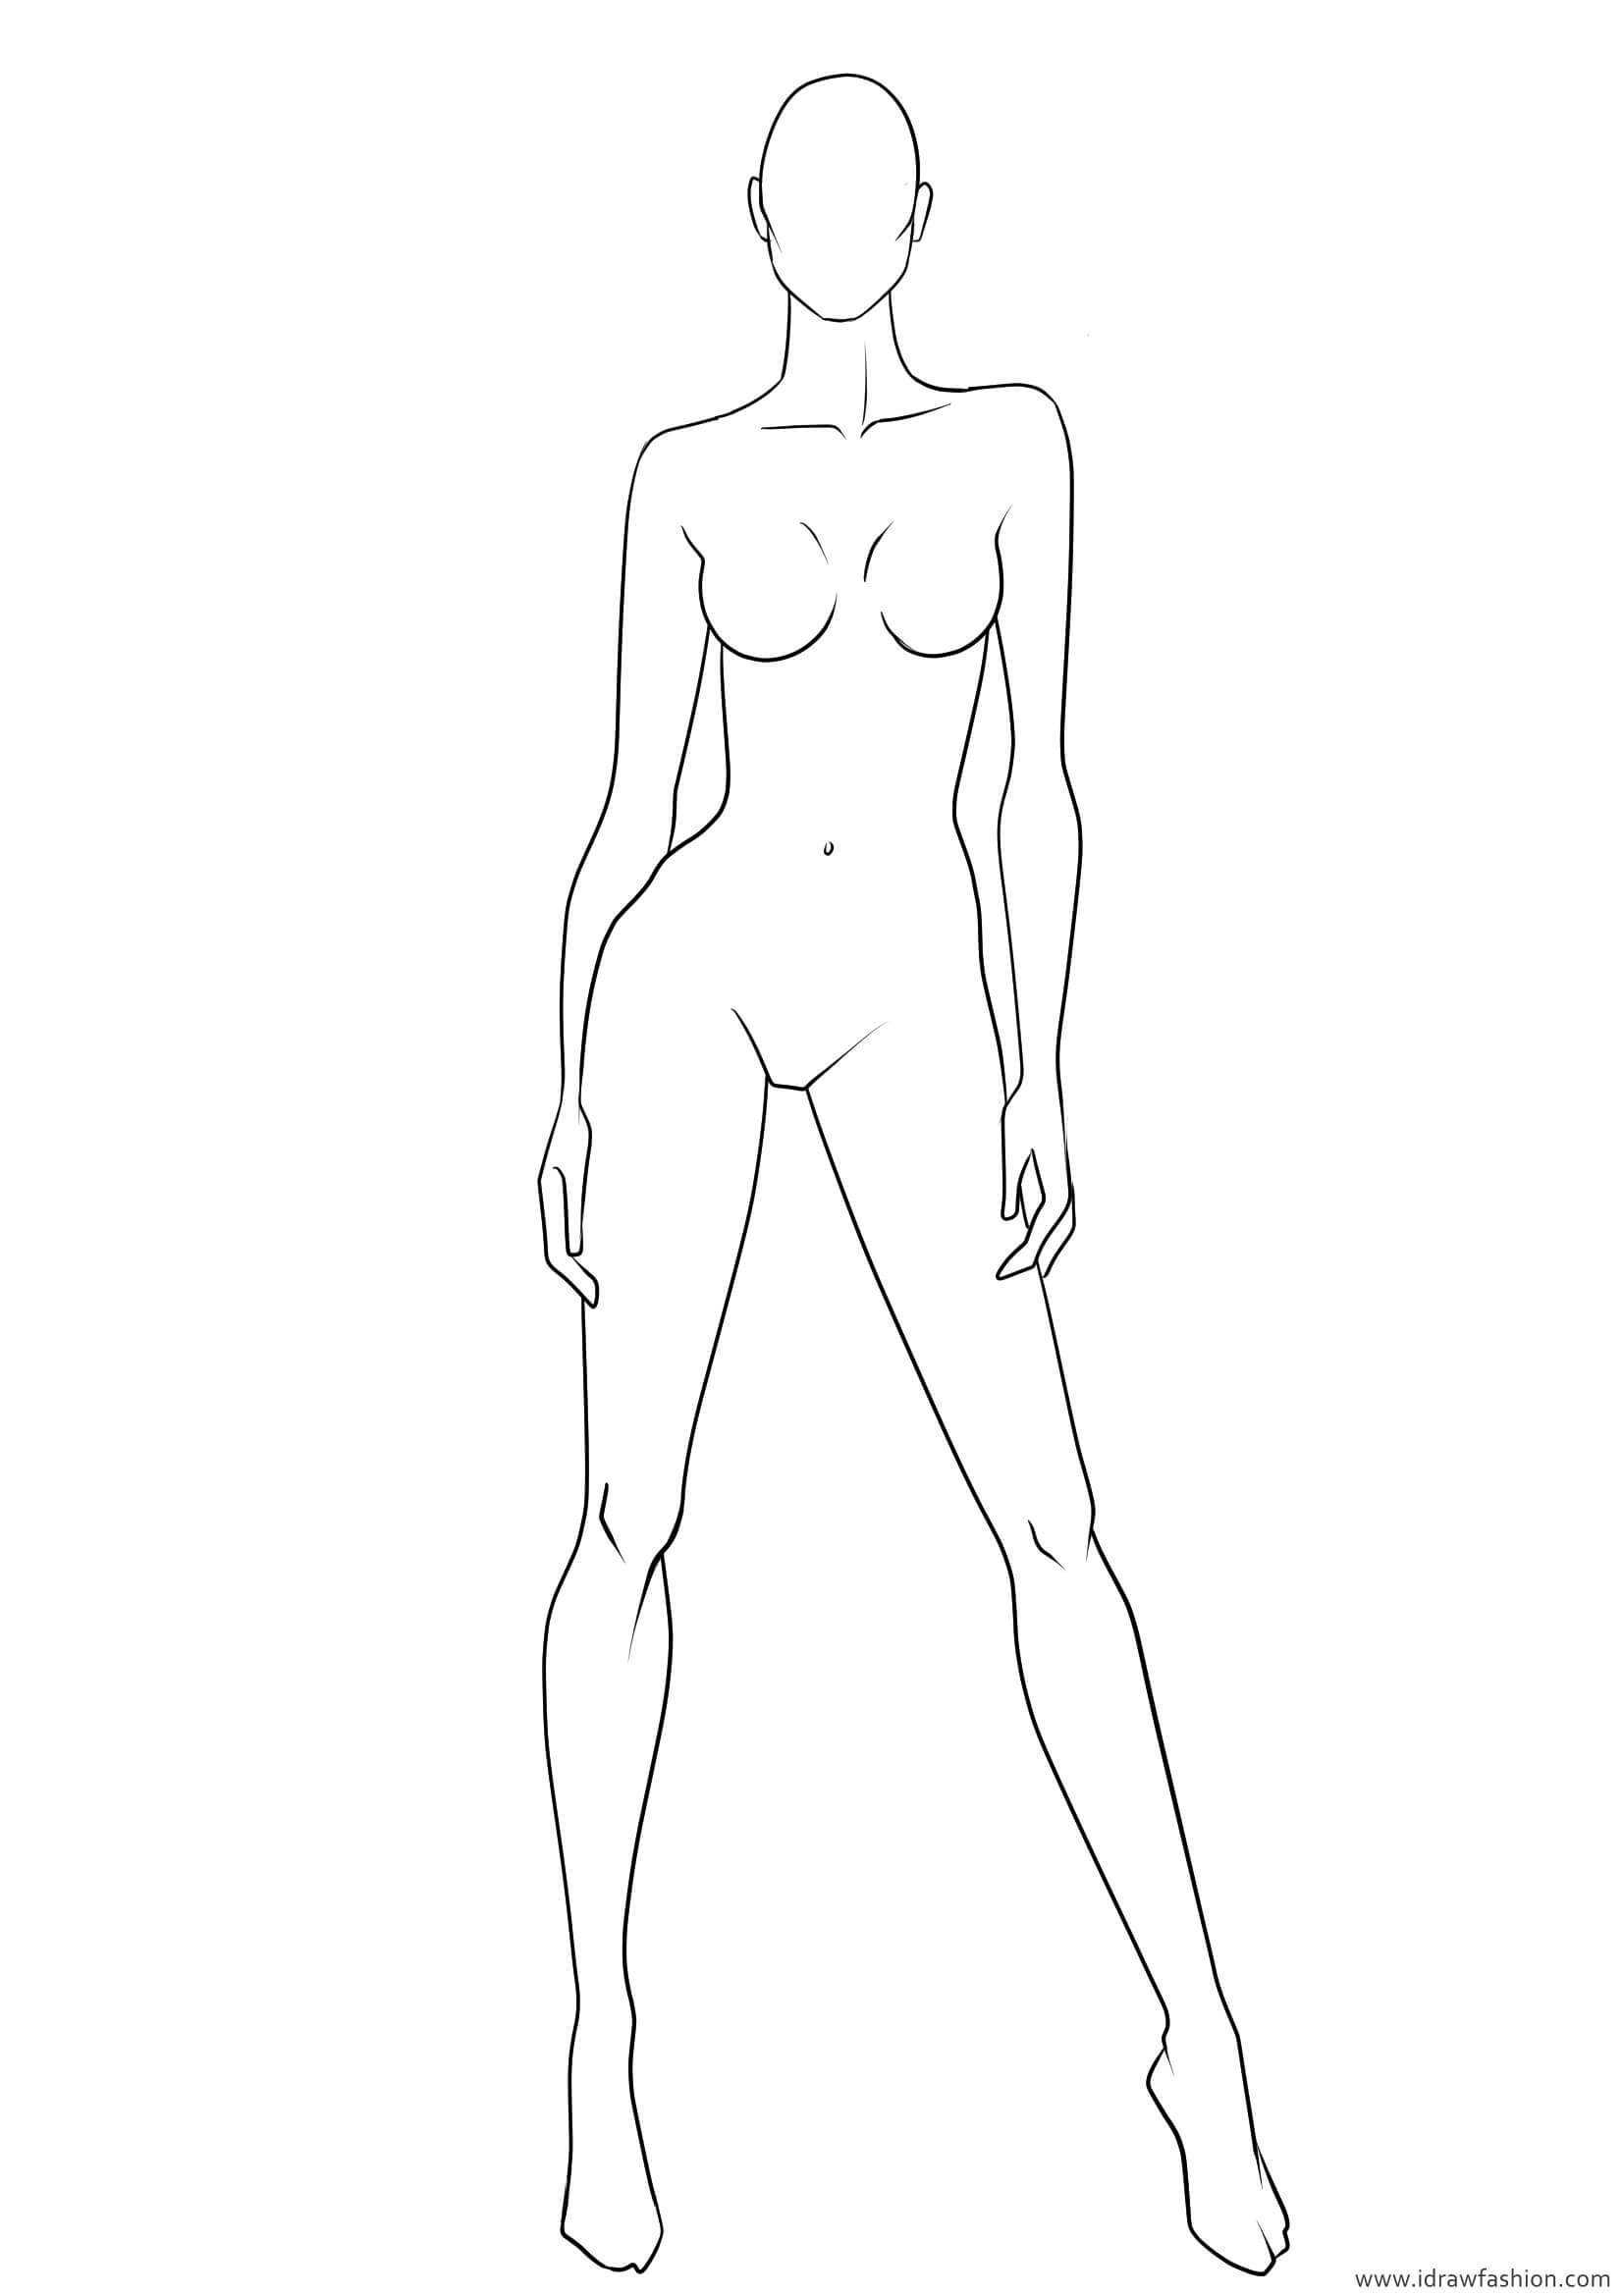 Blank Body Sketch At Paintingvalley | Explore Collection Intended For Blank Model Sketch Template